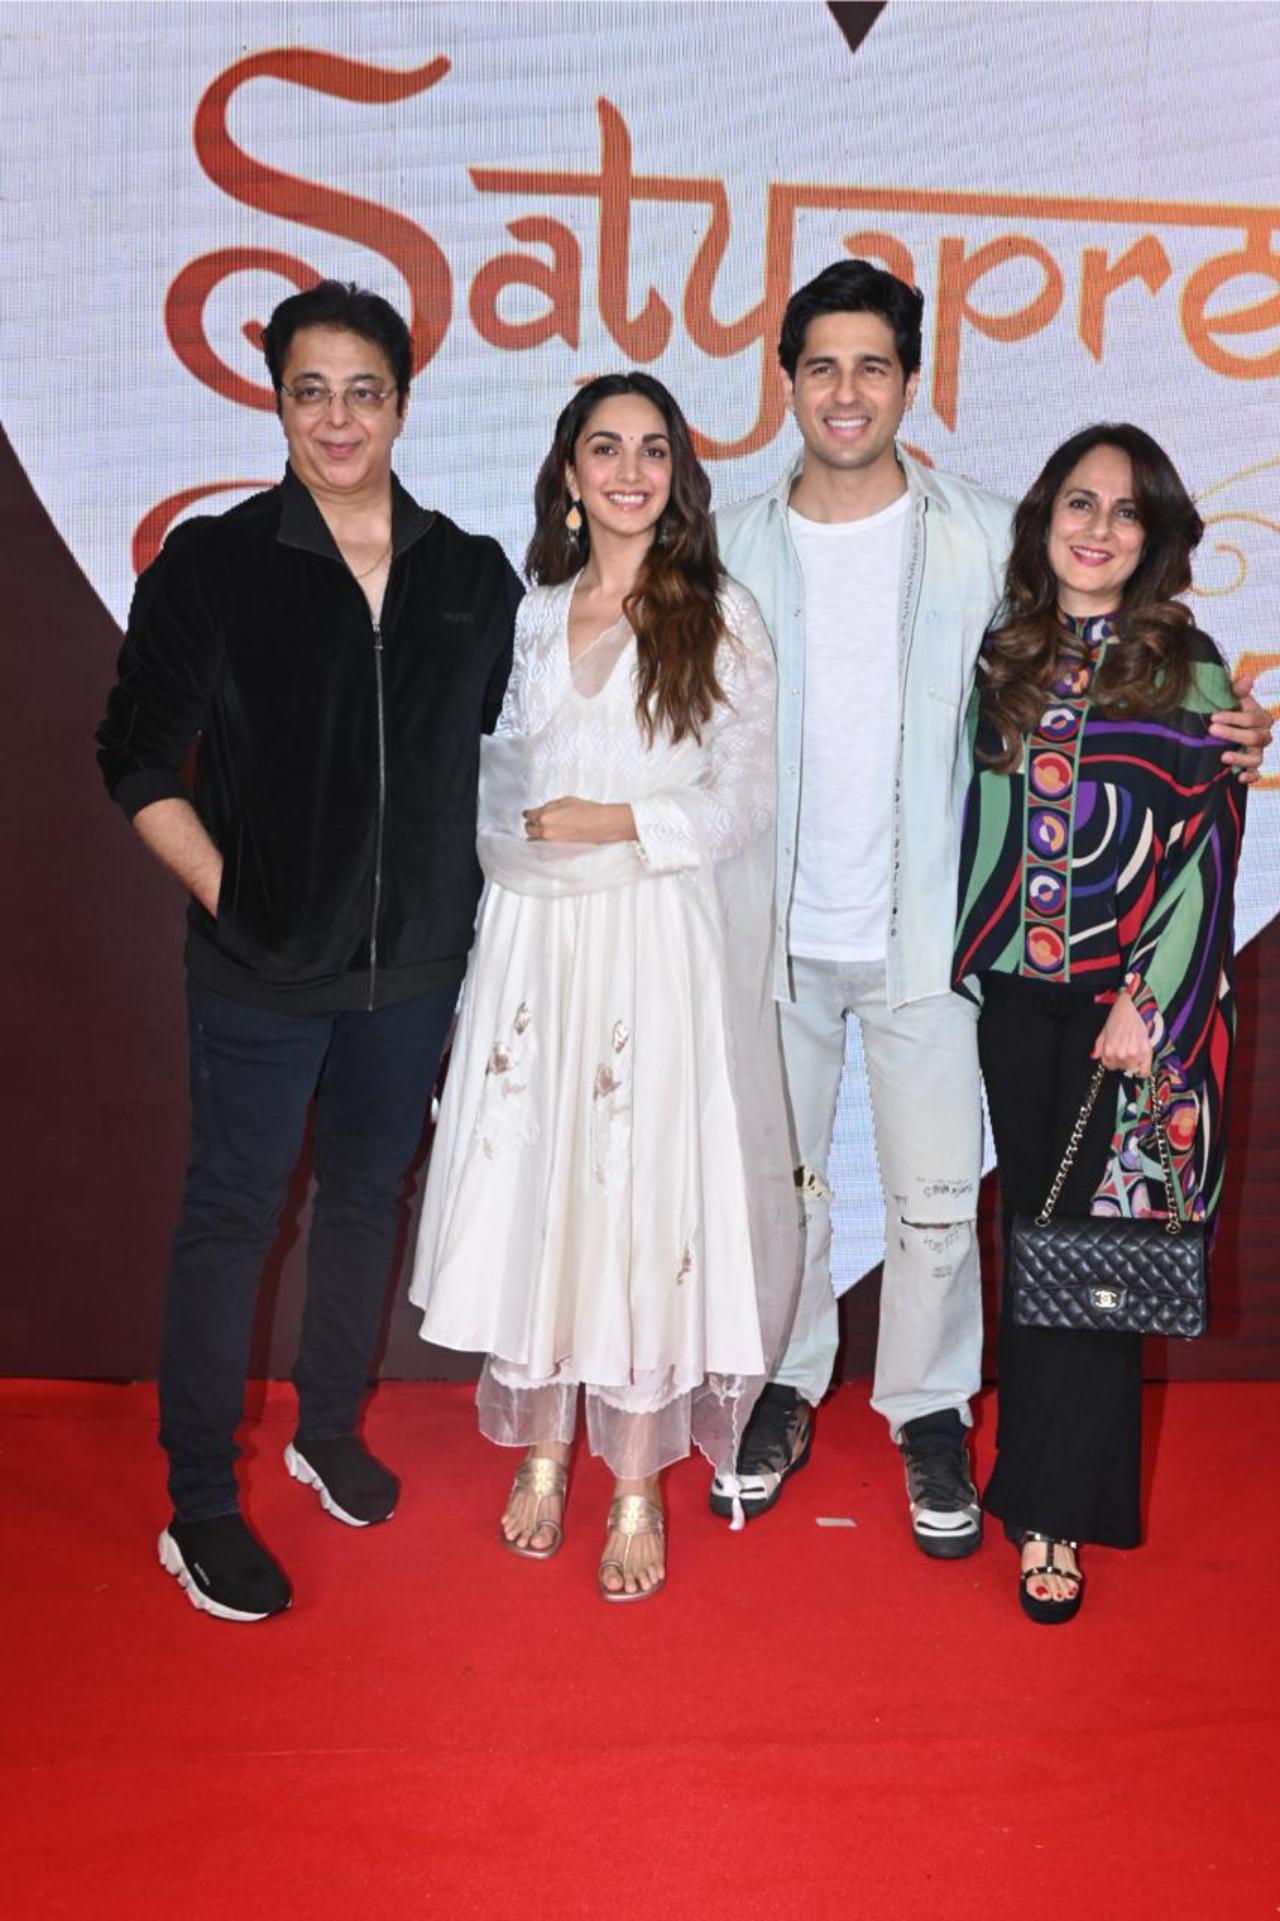 Kiara Advani, the leading lady of the film came for the screening with her husband Sidharth Malhotra and her parents. The actress looked stunning in a white anarkali